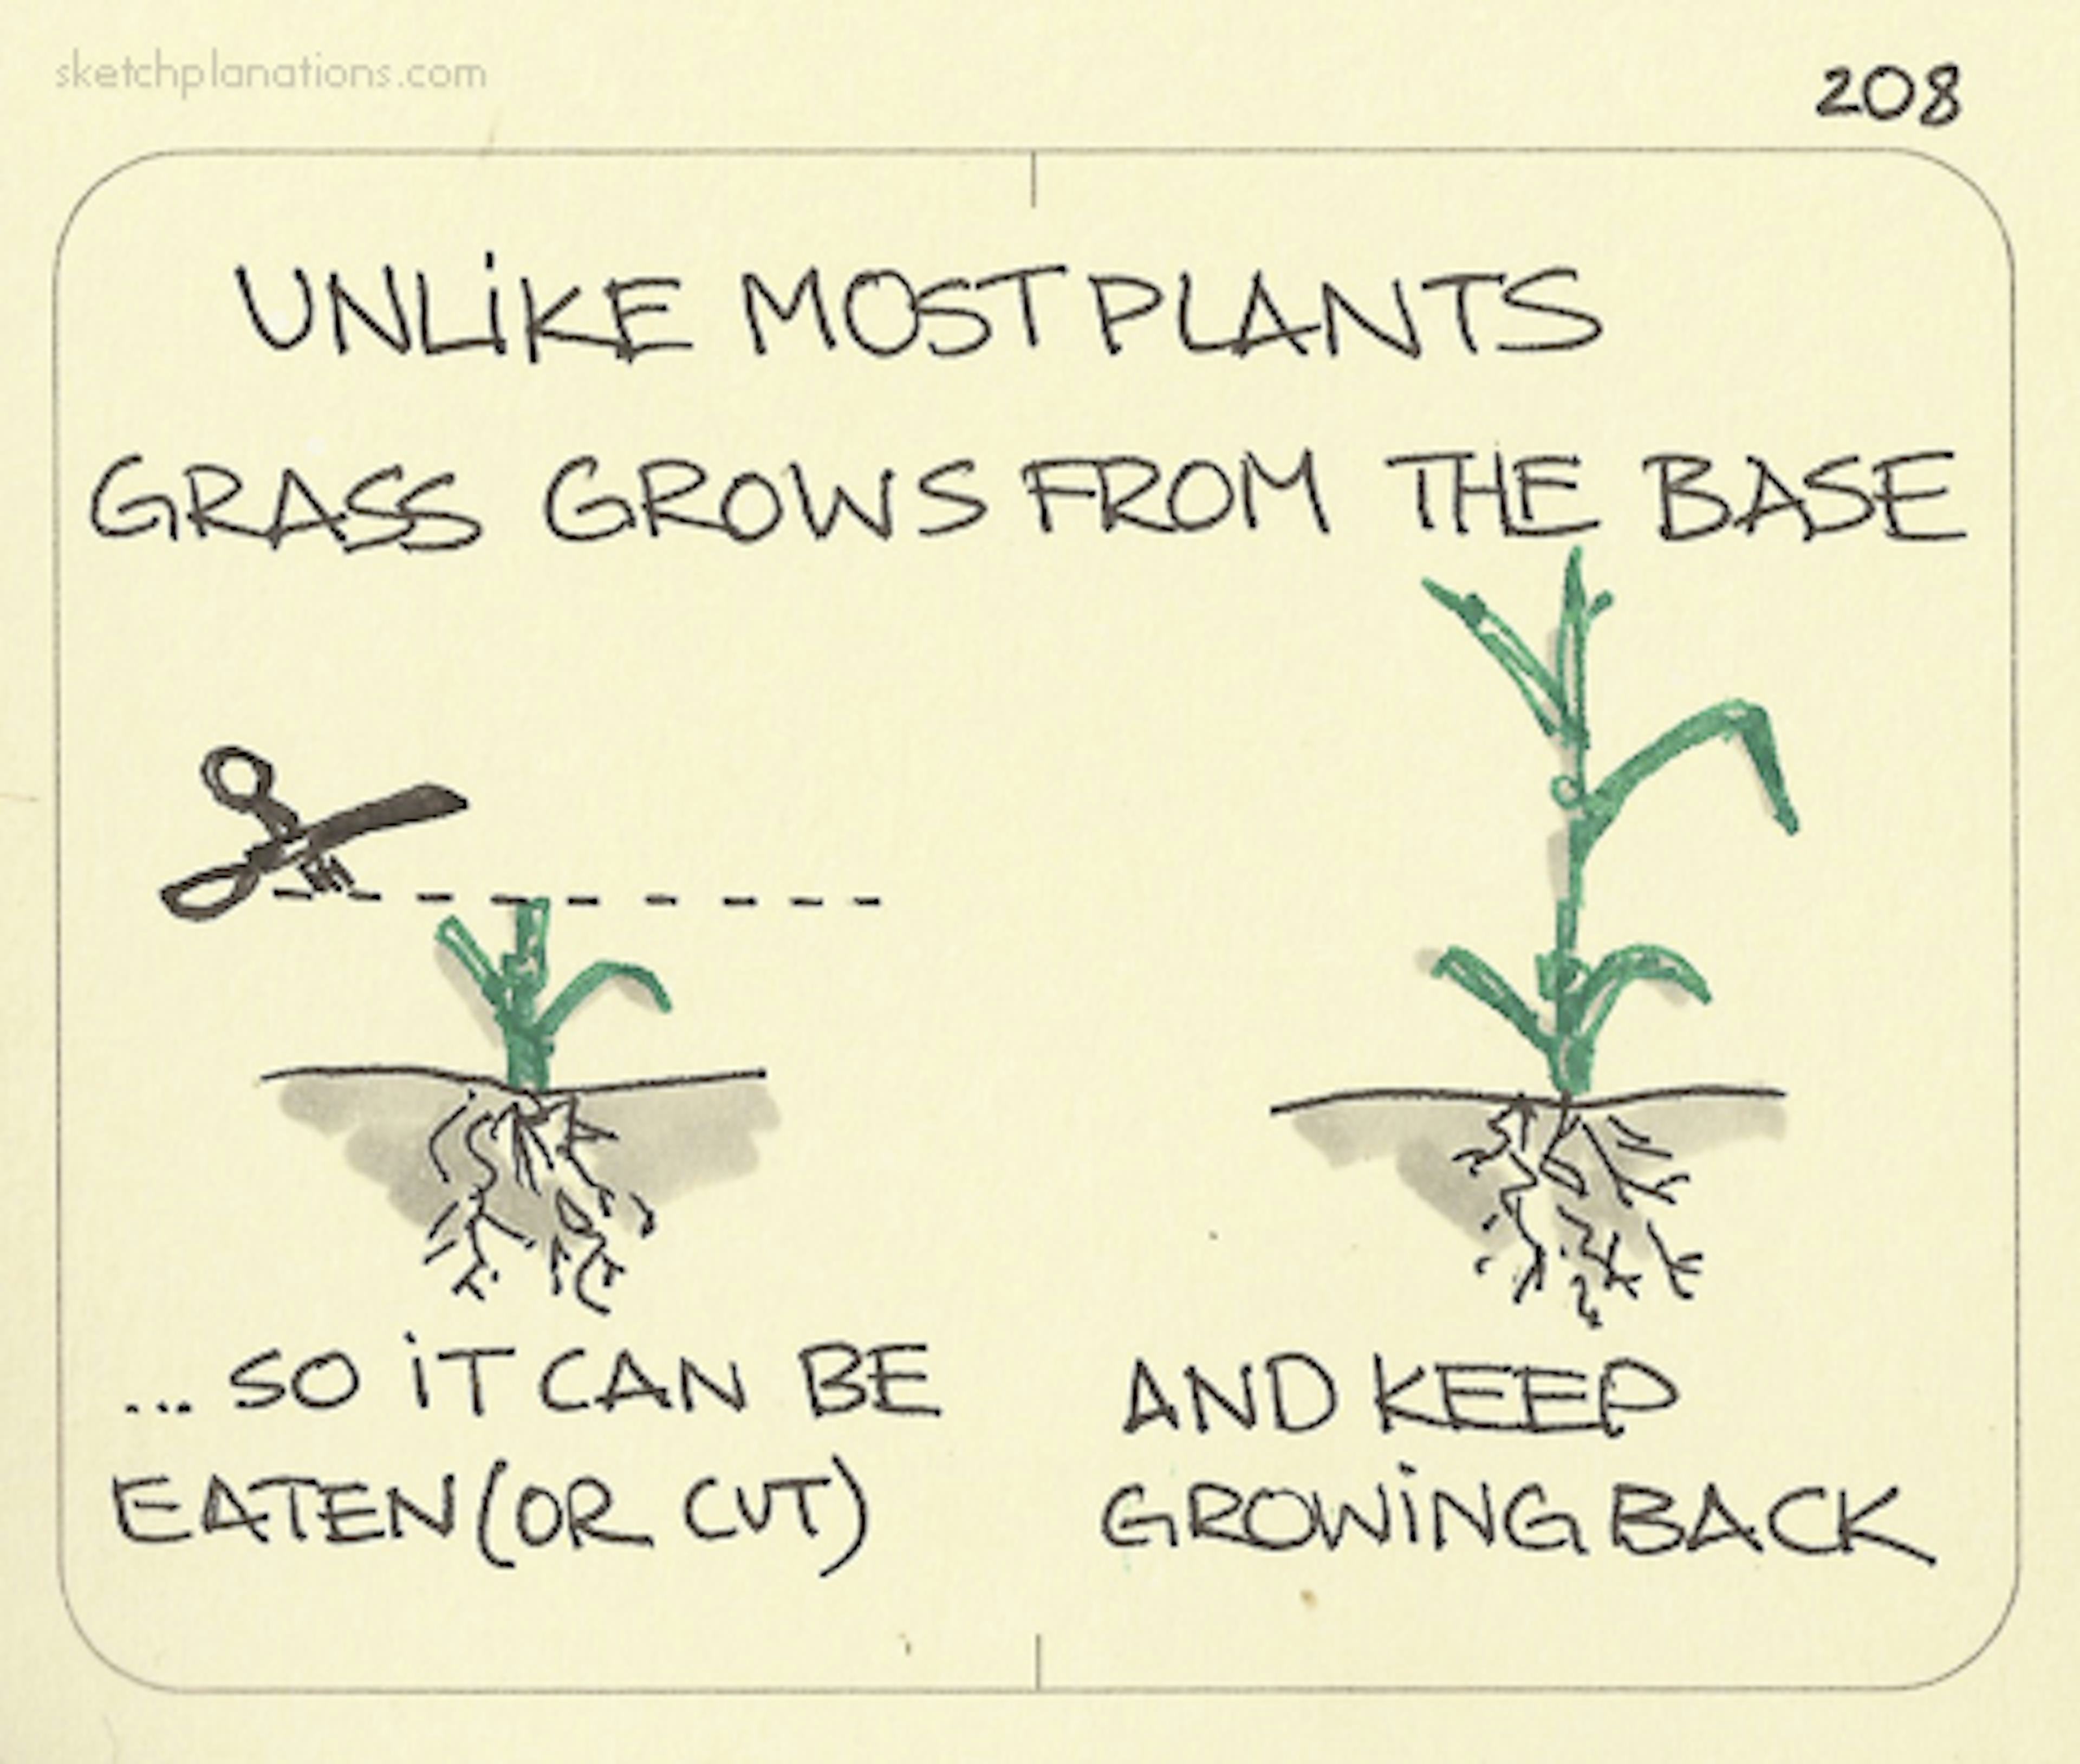 Unlike most plants, grass grows from the base - Sketchplanations